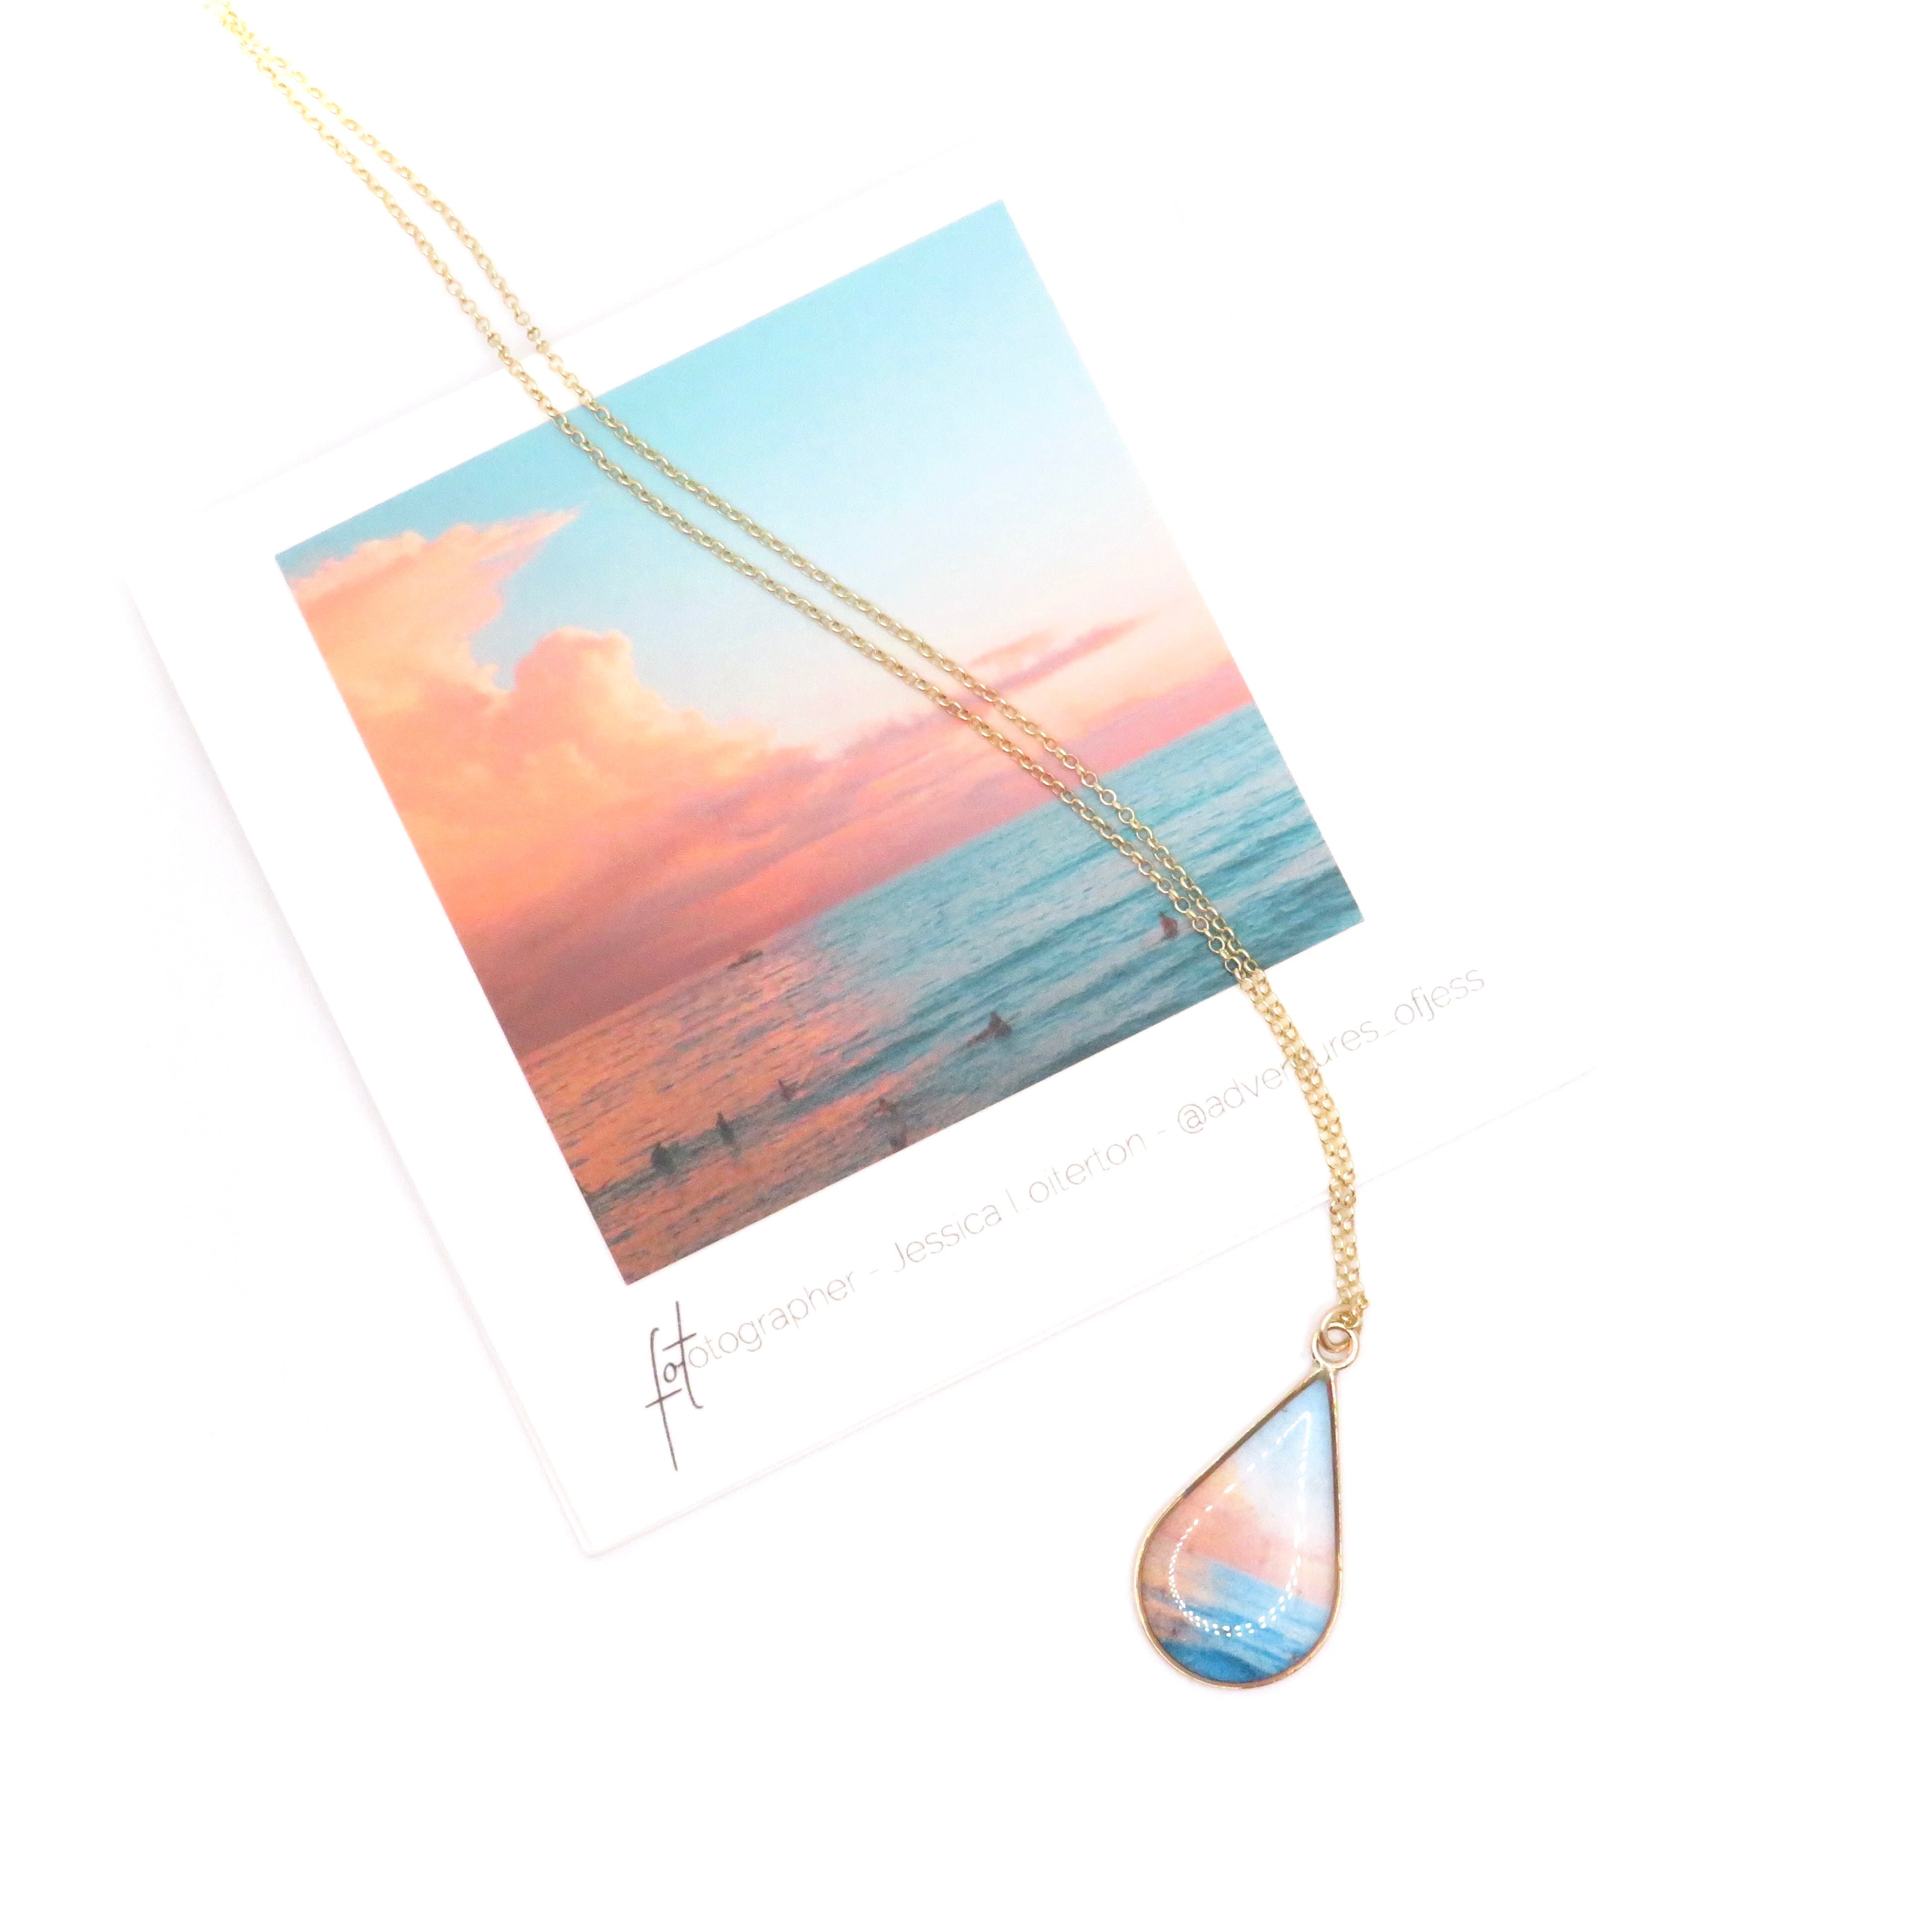 Sunset Gift Necklace | Gold